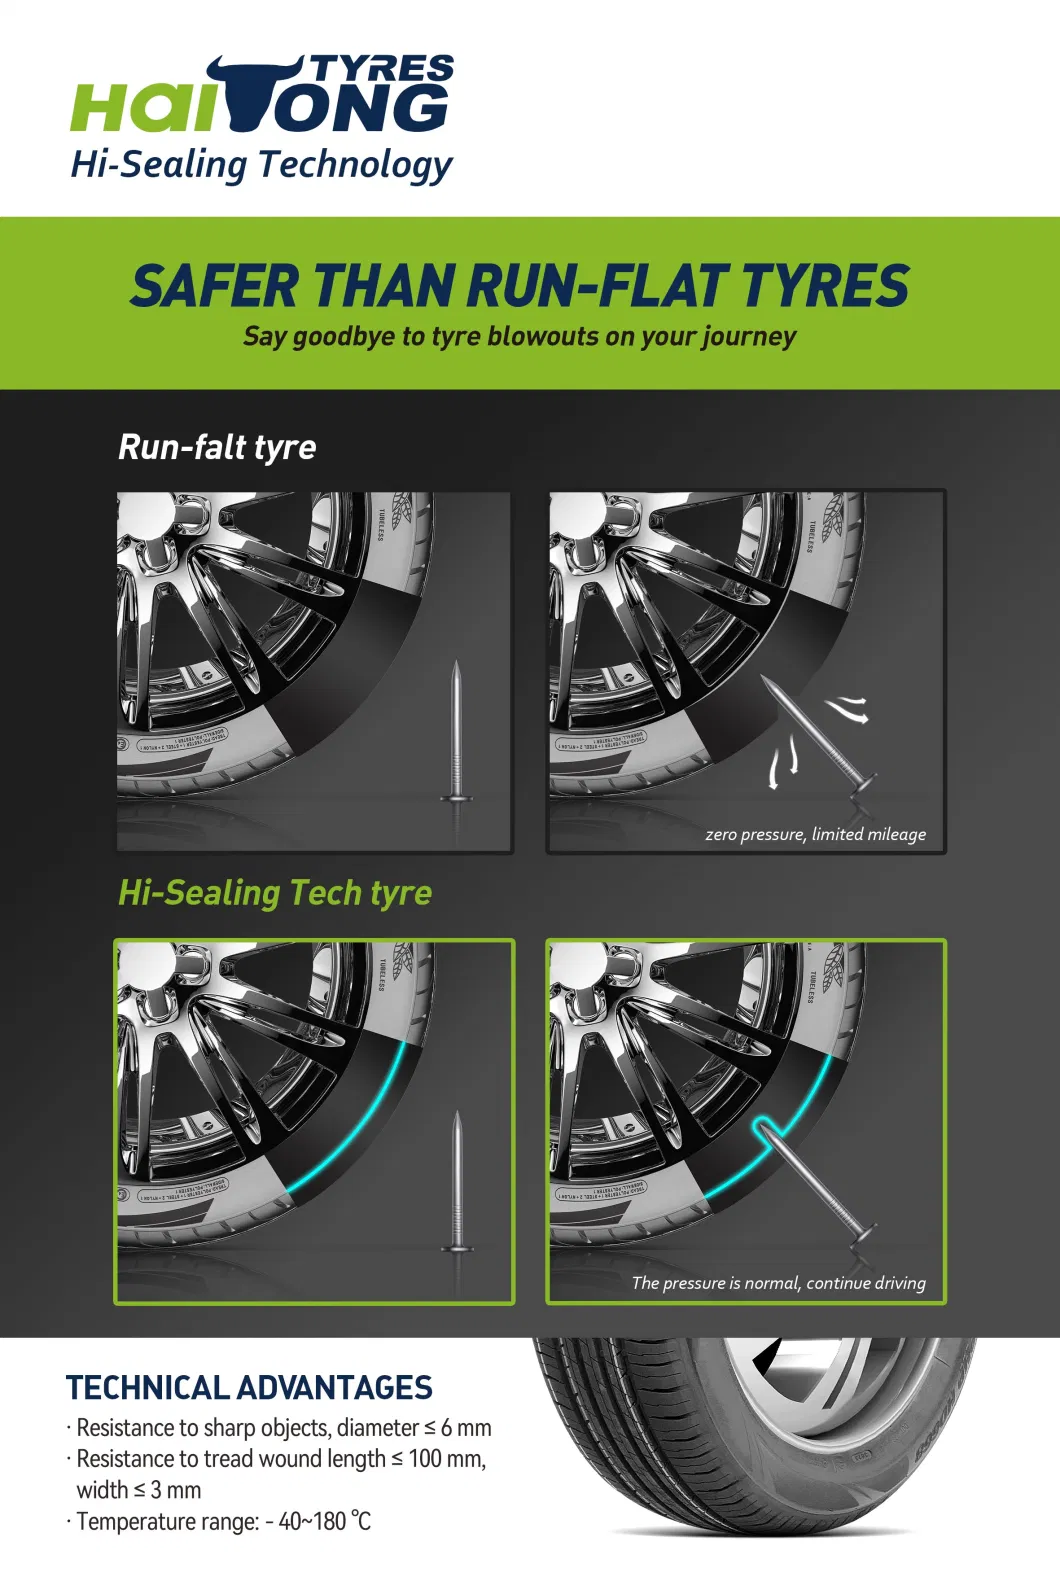 Tires Good Quality Radial Tires for High performance 395/85r20 Run-Flat Tires